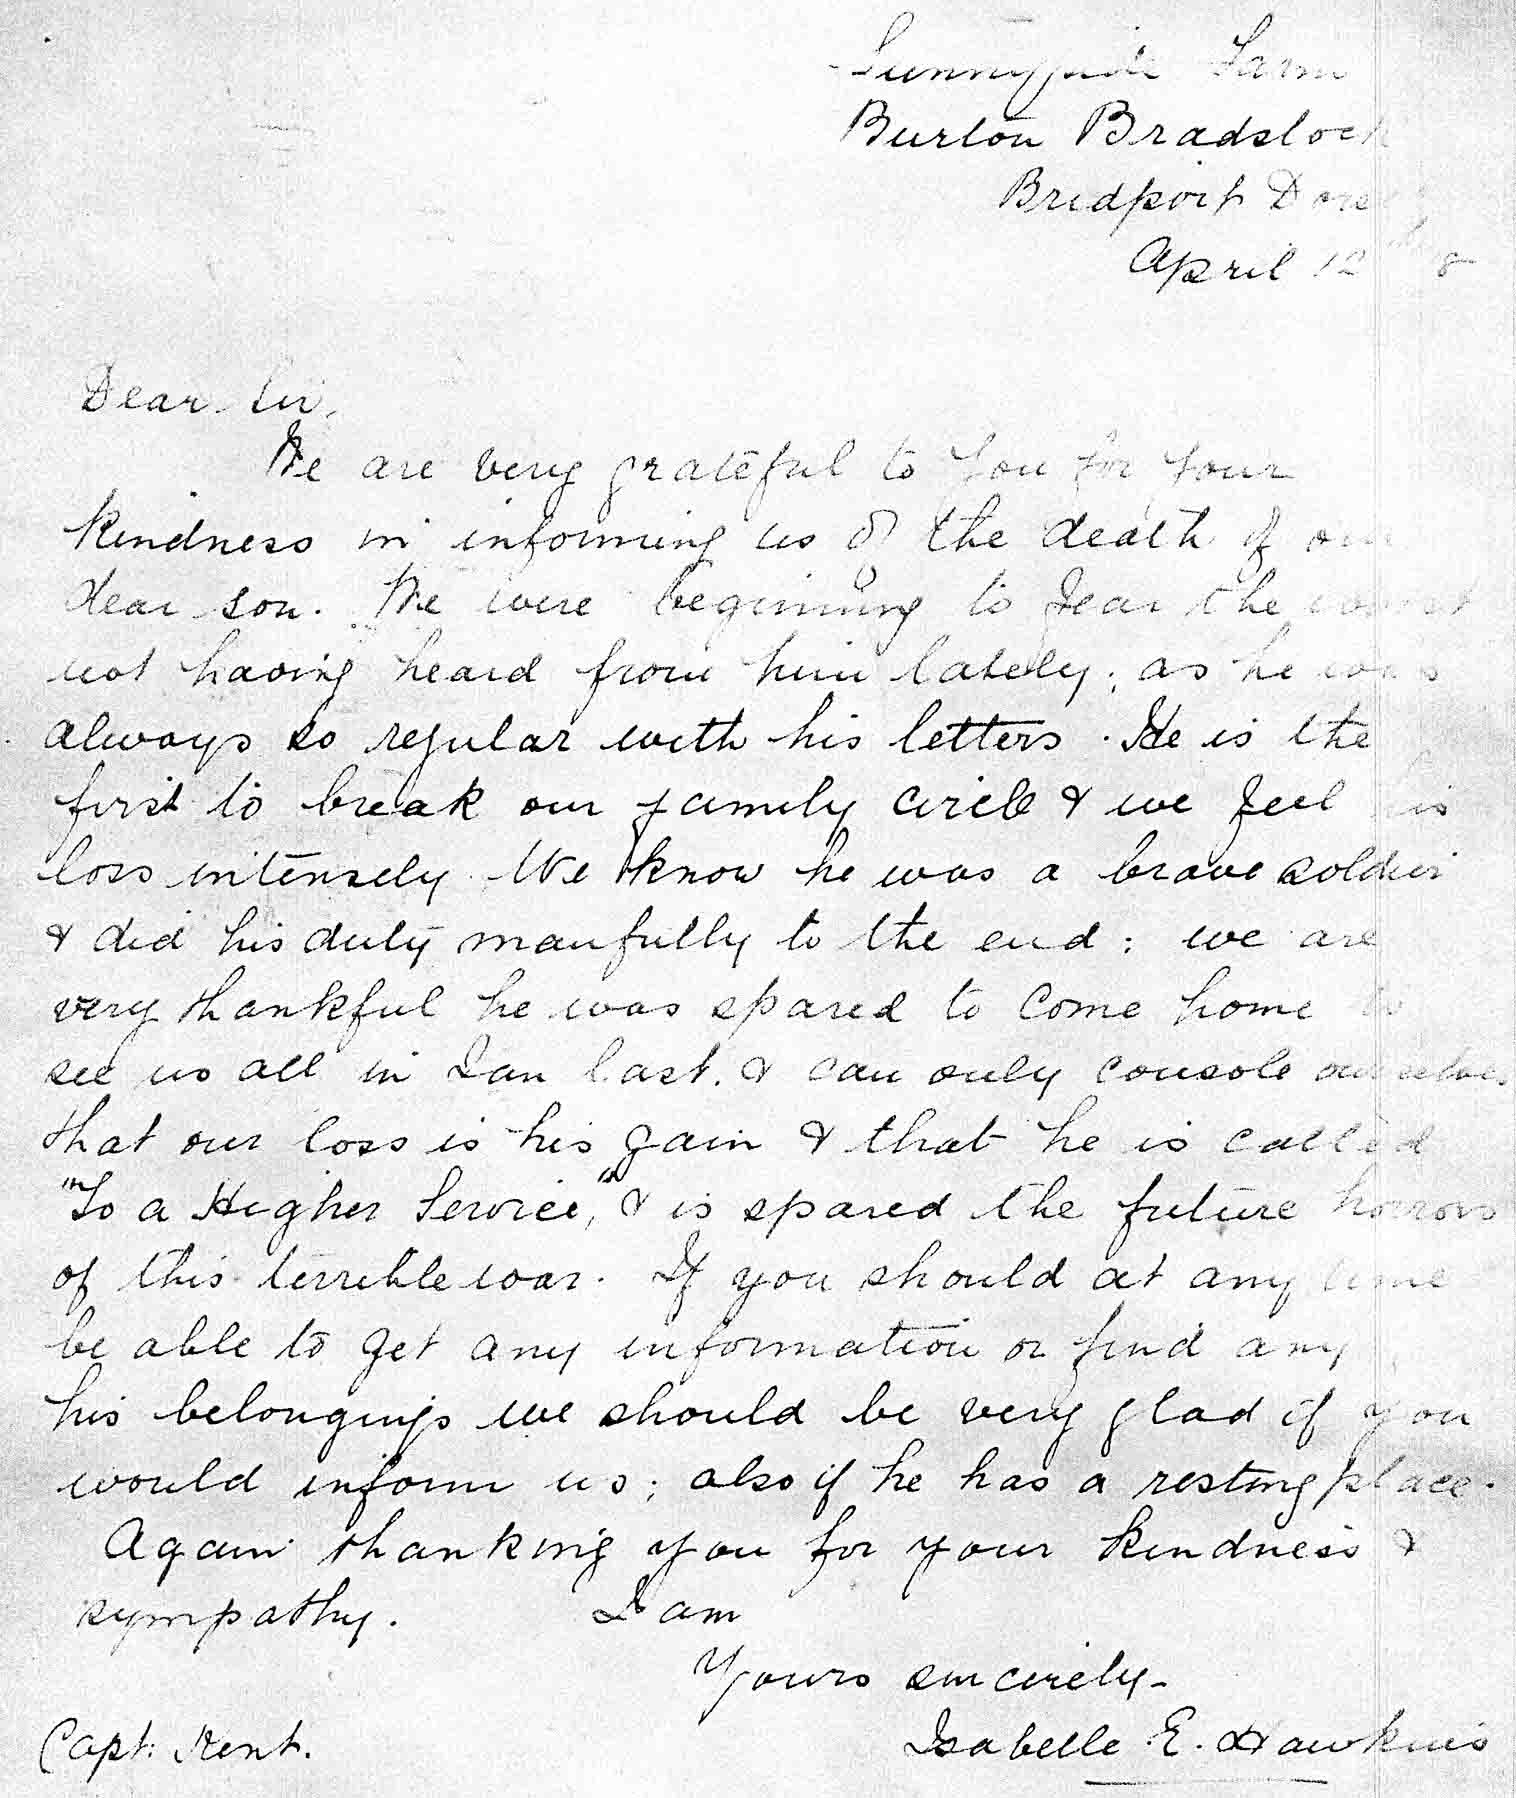 Letter of reply to Capt Kent from Conrad Hawkins' parents